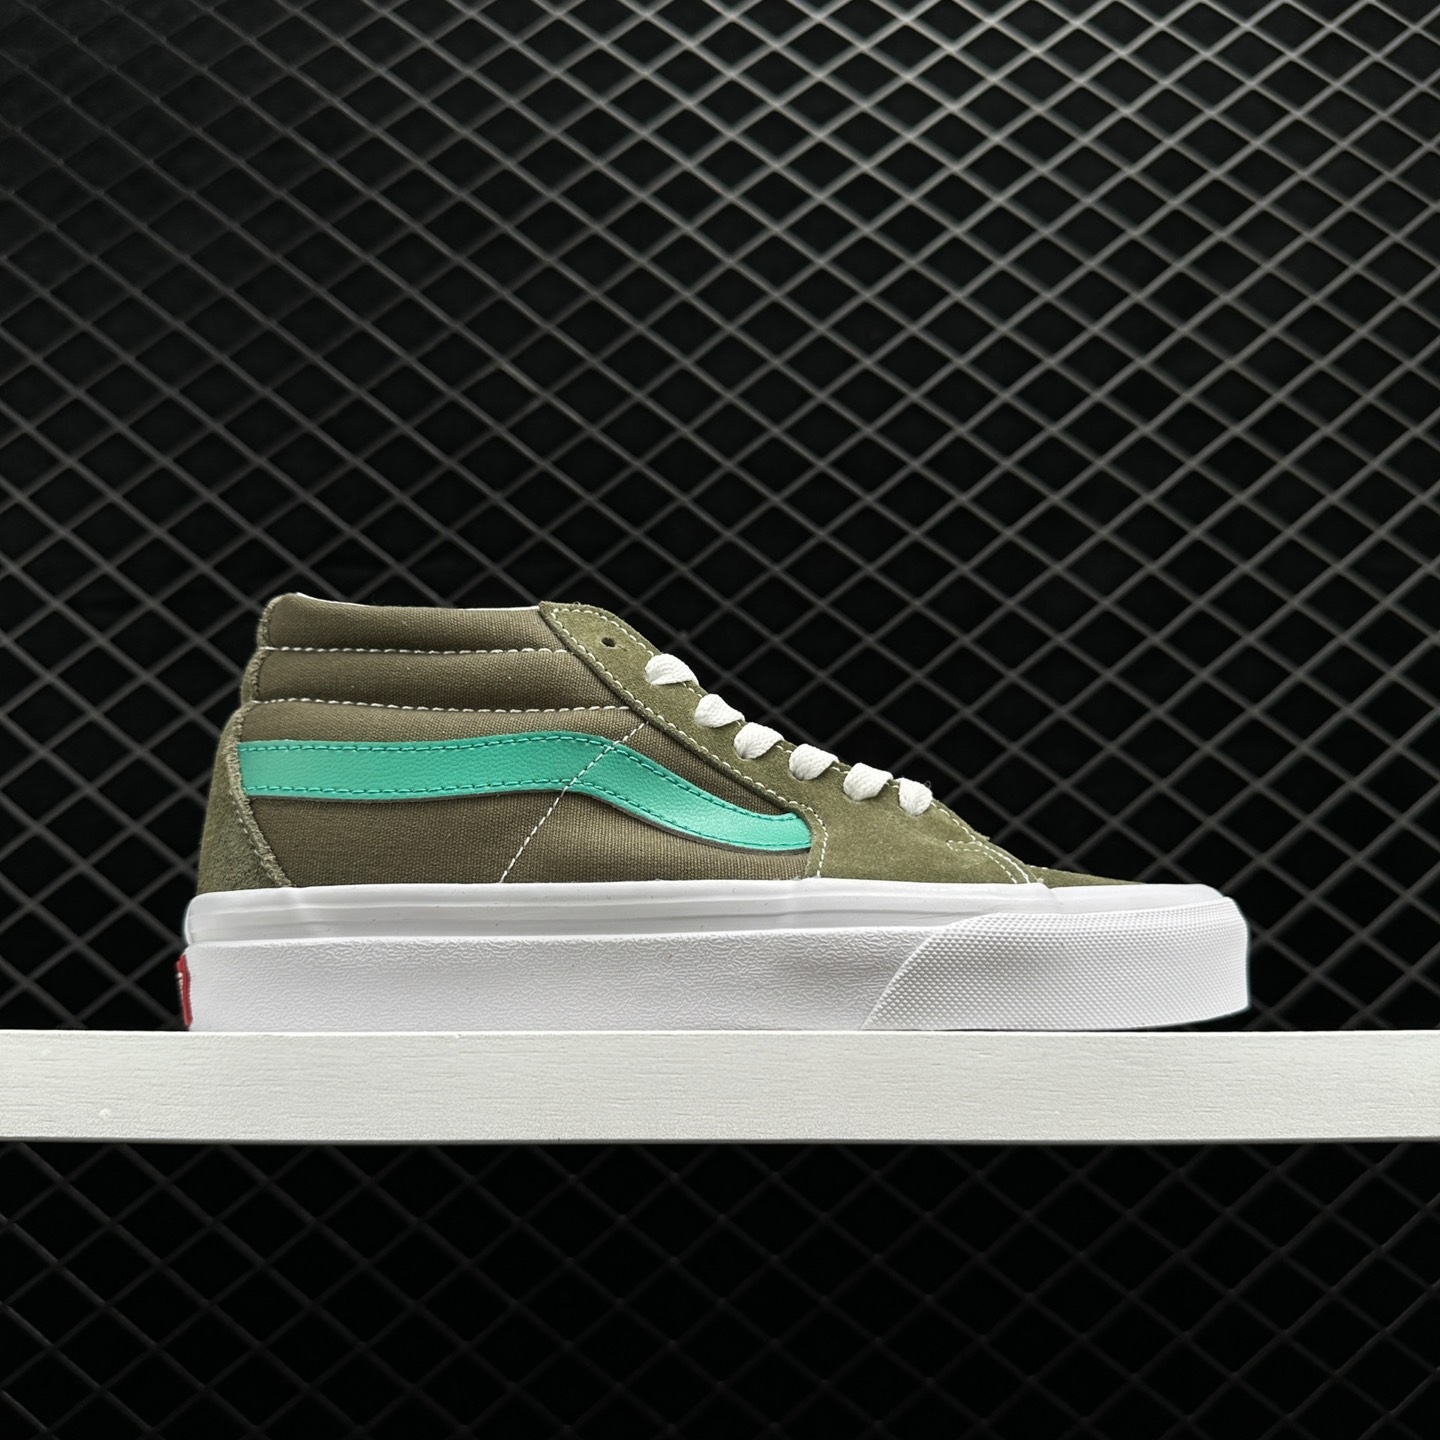 Vans Retro Sport Sk8-Mid 'Deep Lichen Green' - Stylish and Classic Sneakers